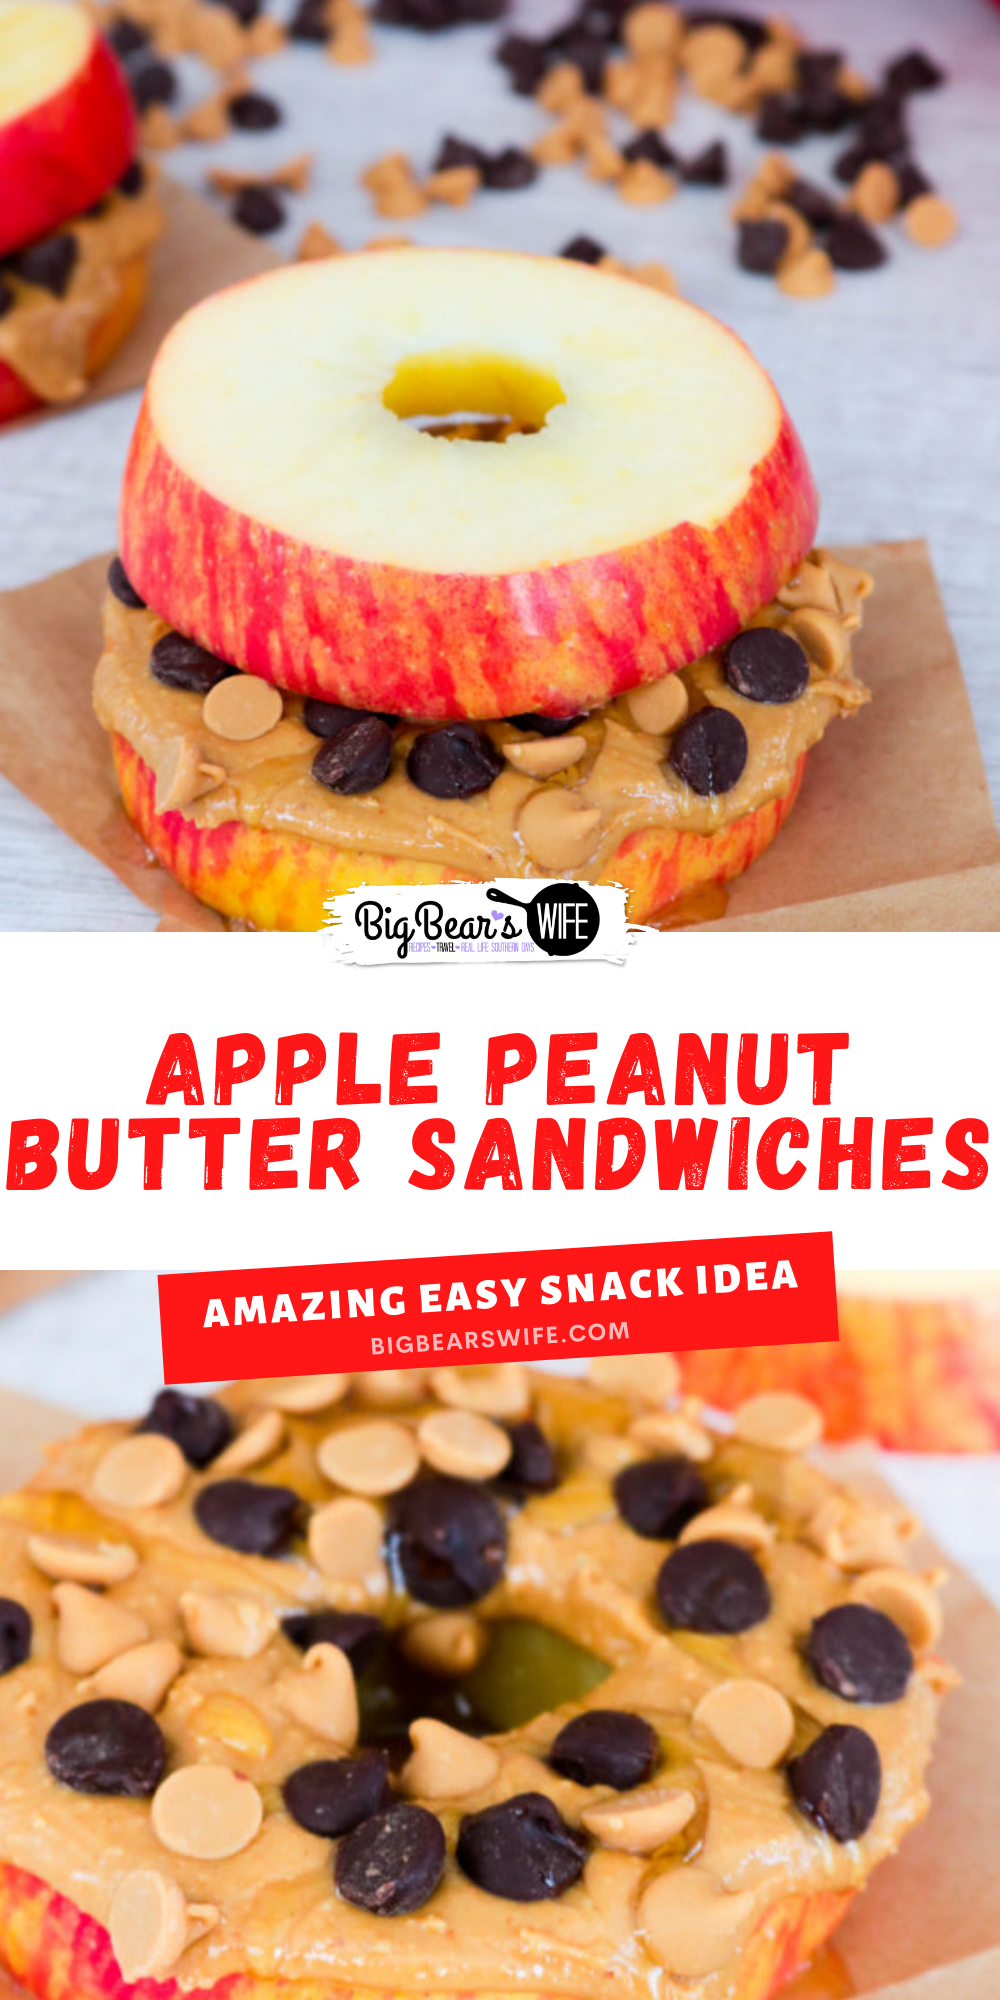 These Apple Peanut Butter Sandwiches are fun and easy to make! Eat these apple “sandwiches” with just peanut butter or add in all sorts of treats like chocolate chips, peanut butter chips, honey, oats, or raisins. via @bigbearswife